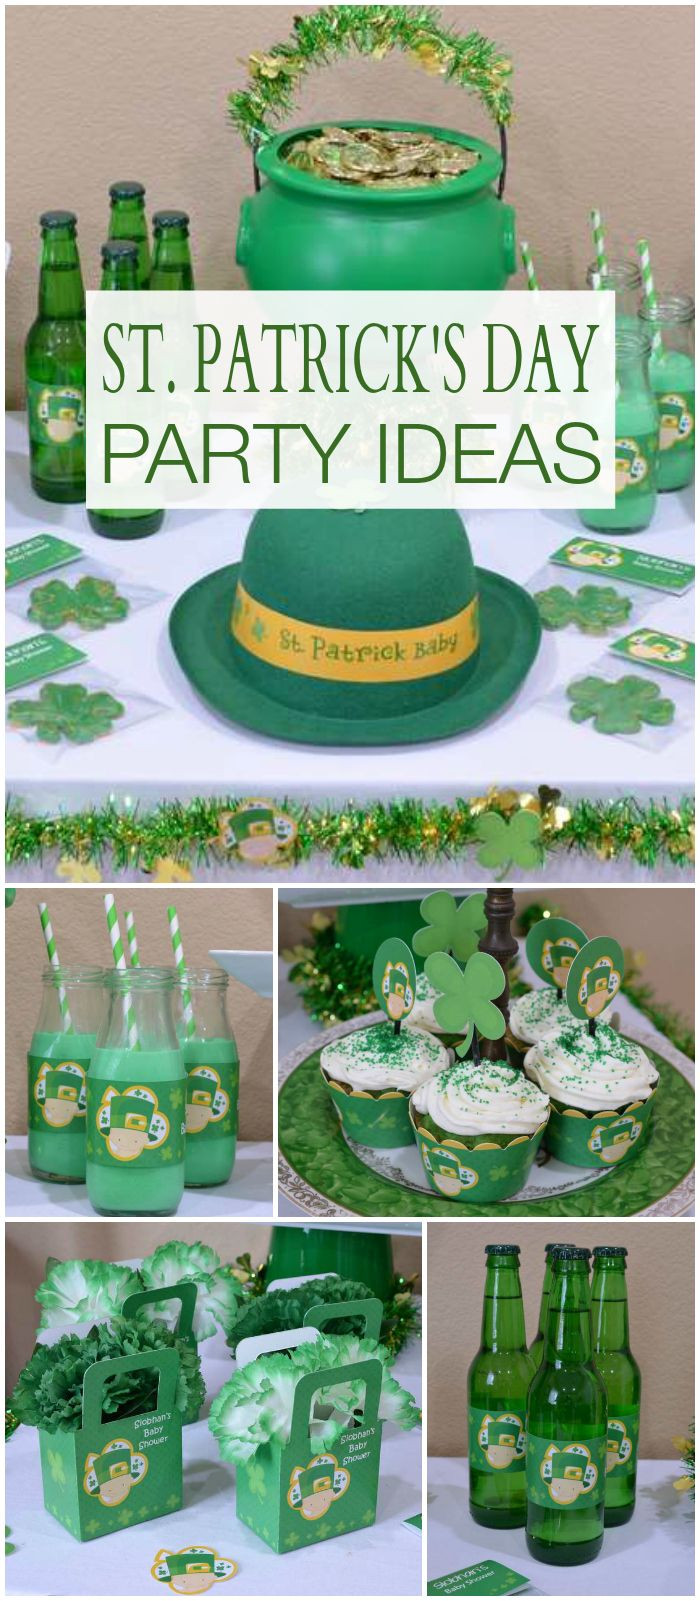 St Patrick Day Party Ideas
 251 best images about St Patrick s Day Party Ideas on